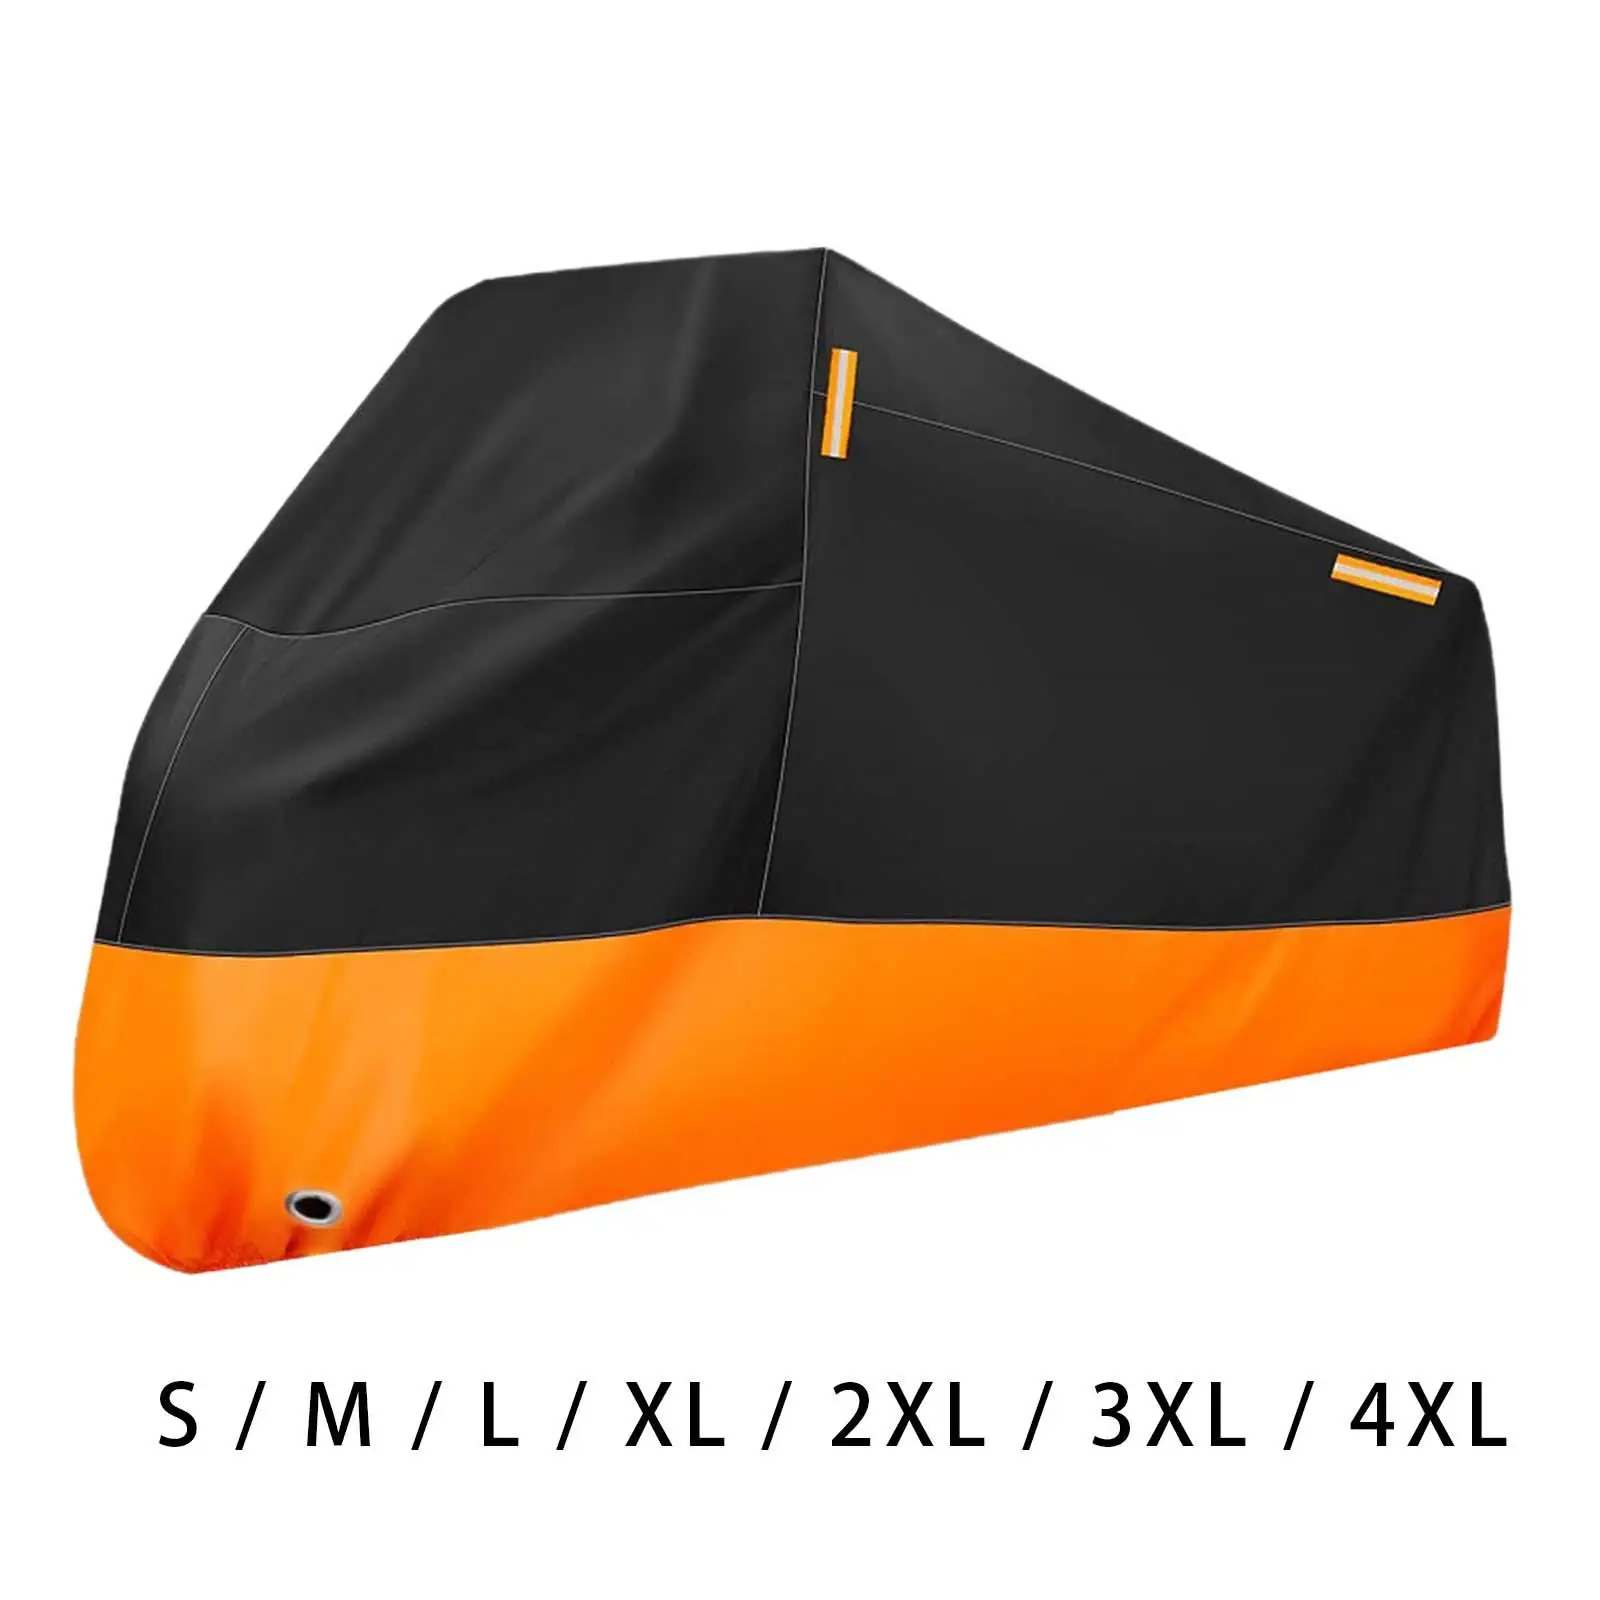 Universal Motorcycle Cover Wear Resistant Durable Outdoor Sun Protection Dustproof Lock Holes Design Windproof Rain Cover